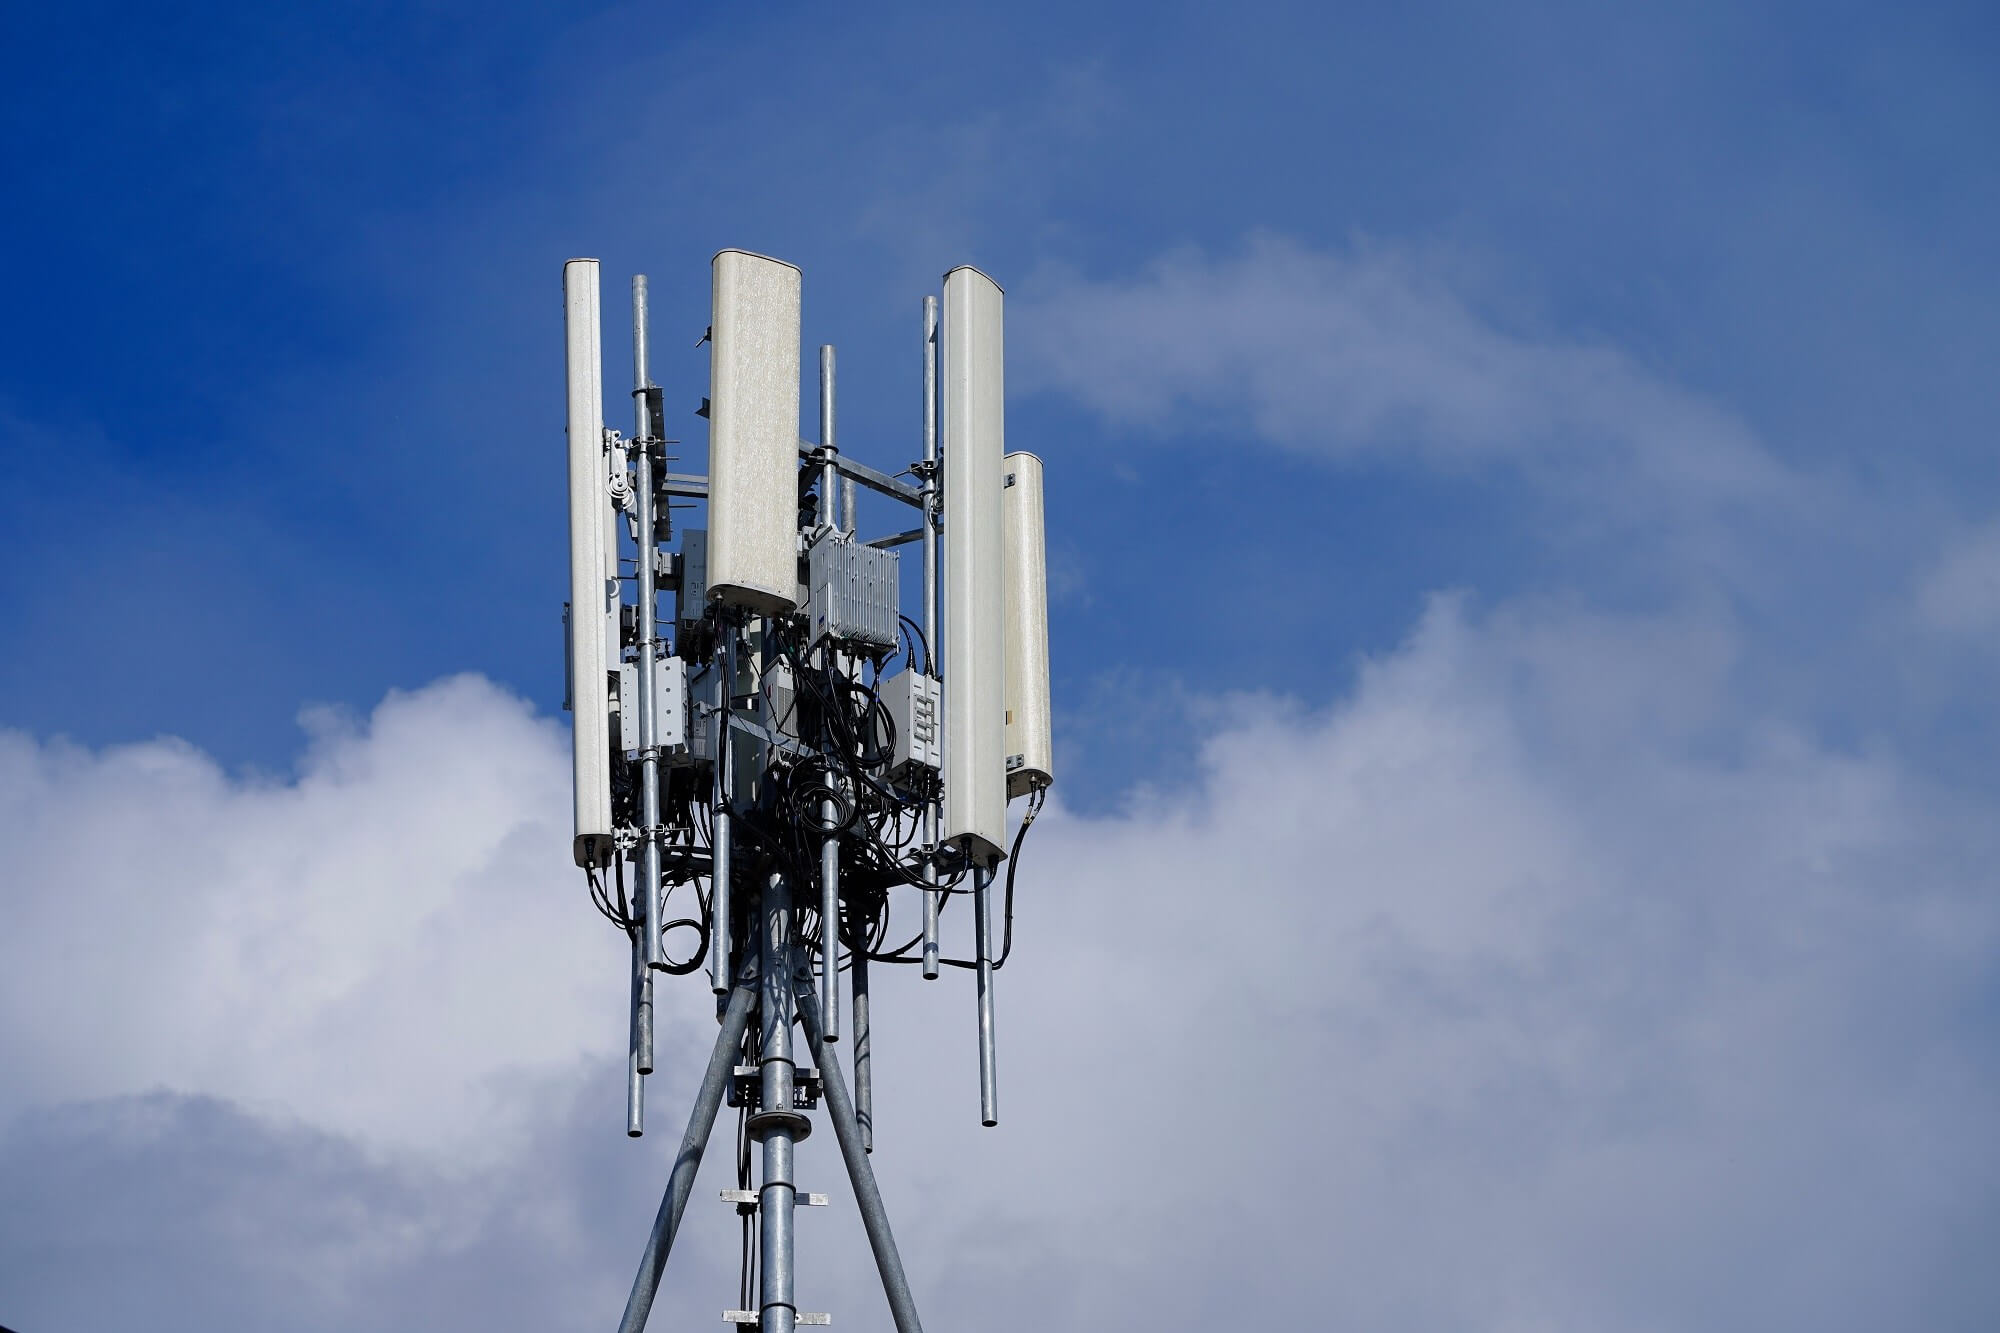 UK cell towers set on fire over 5G Covid-19 conspiracy theories